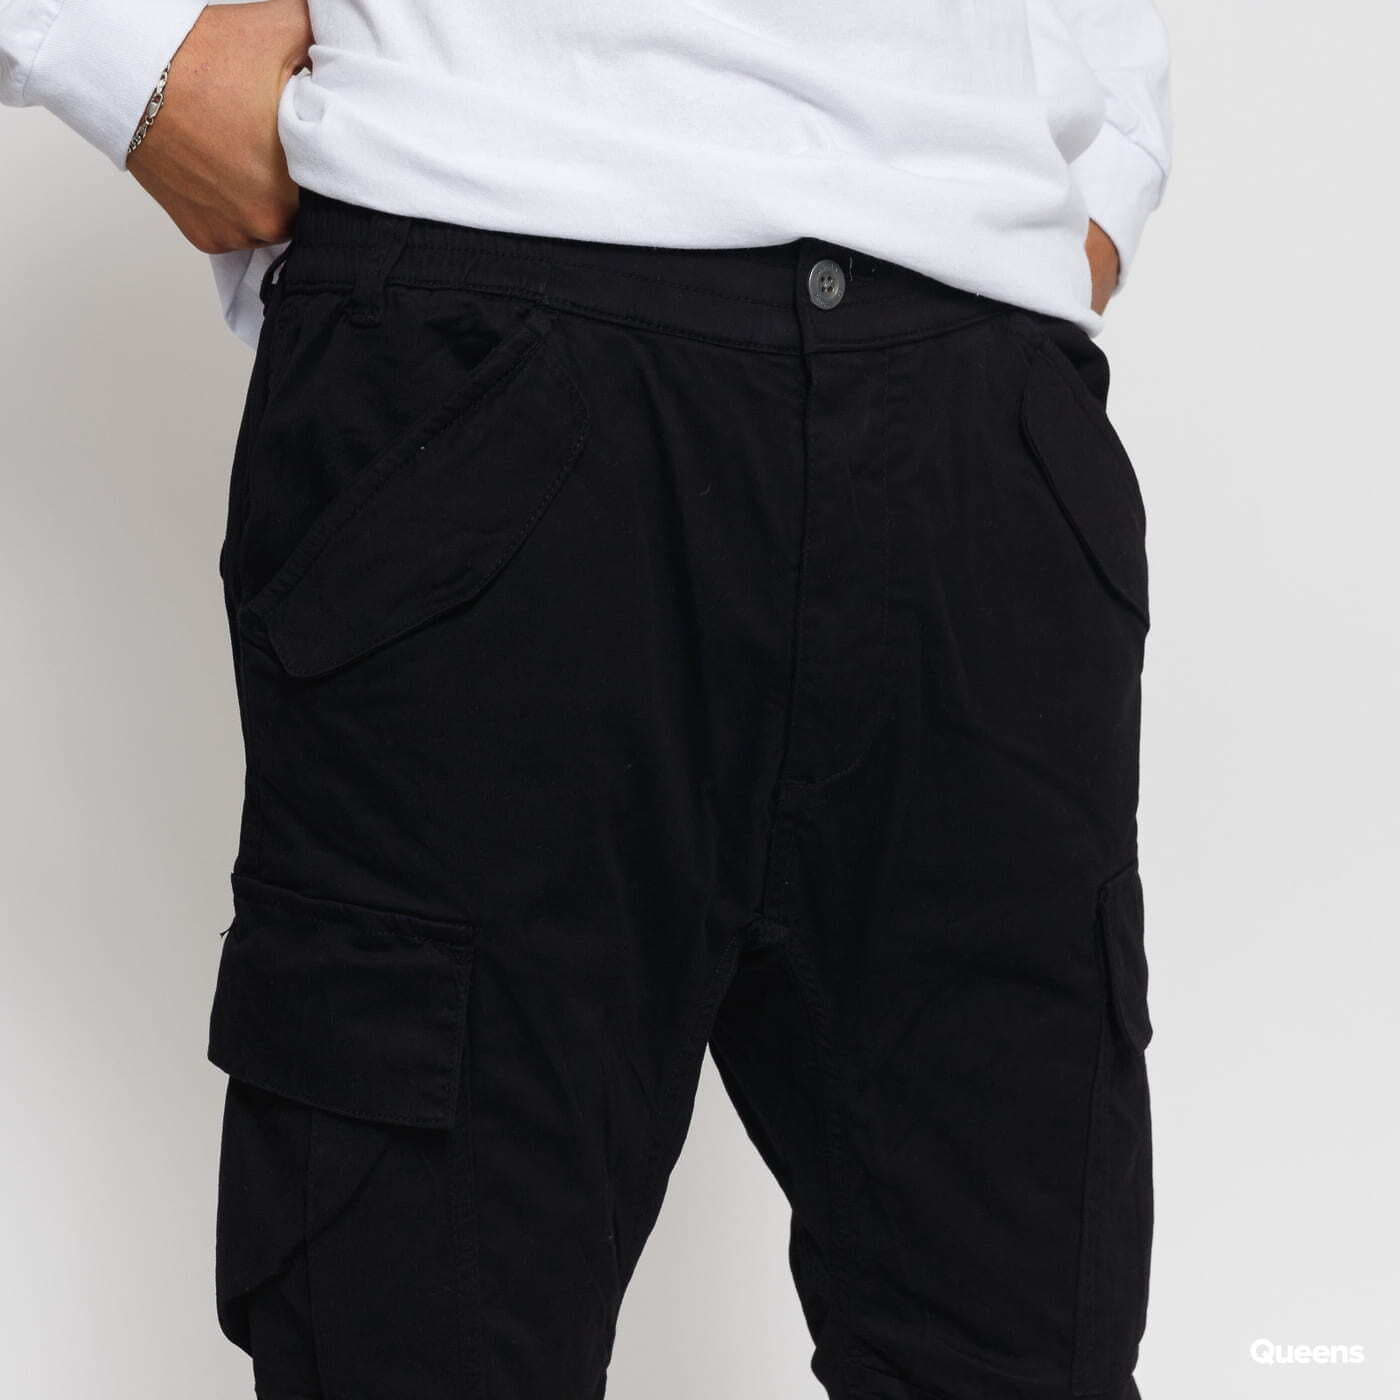 Alpha Industries Black Pant Queens | Pants Airman and jeans